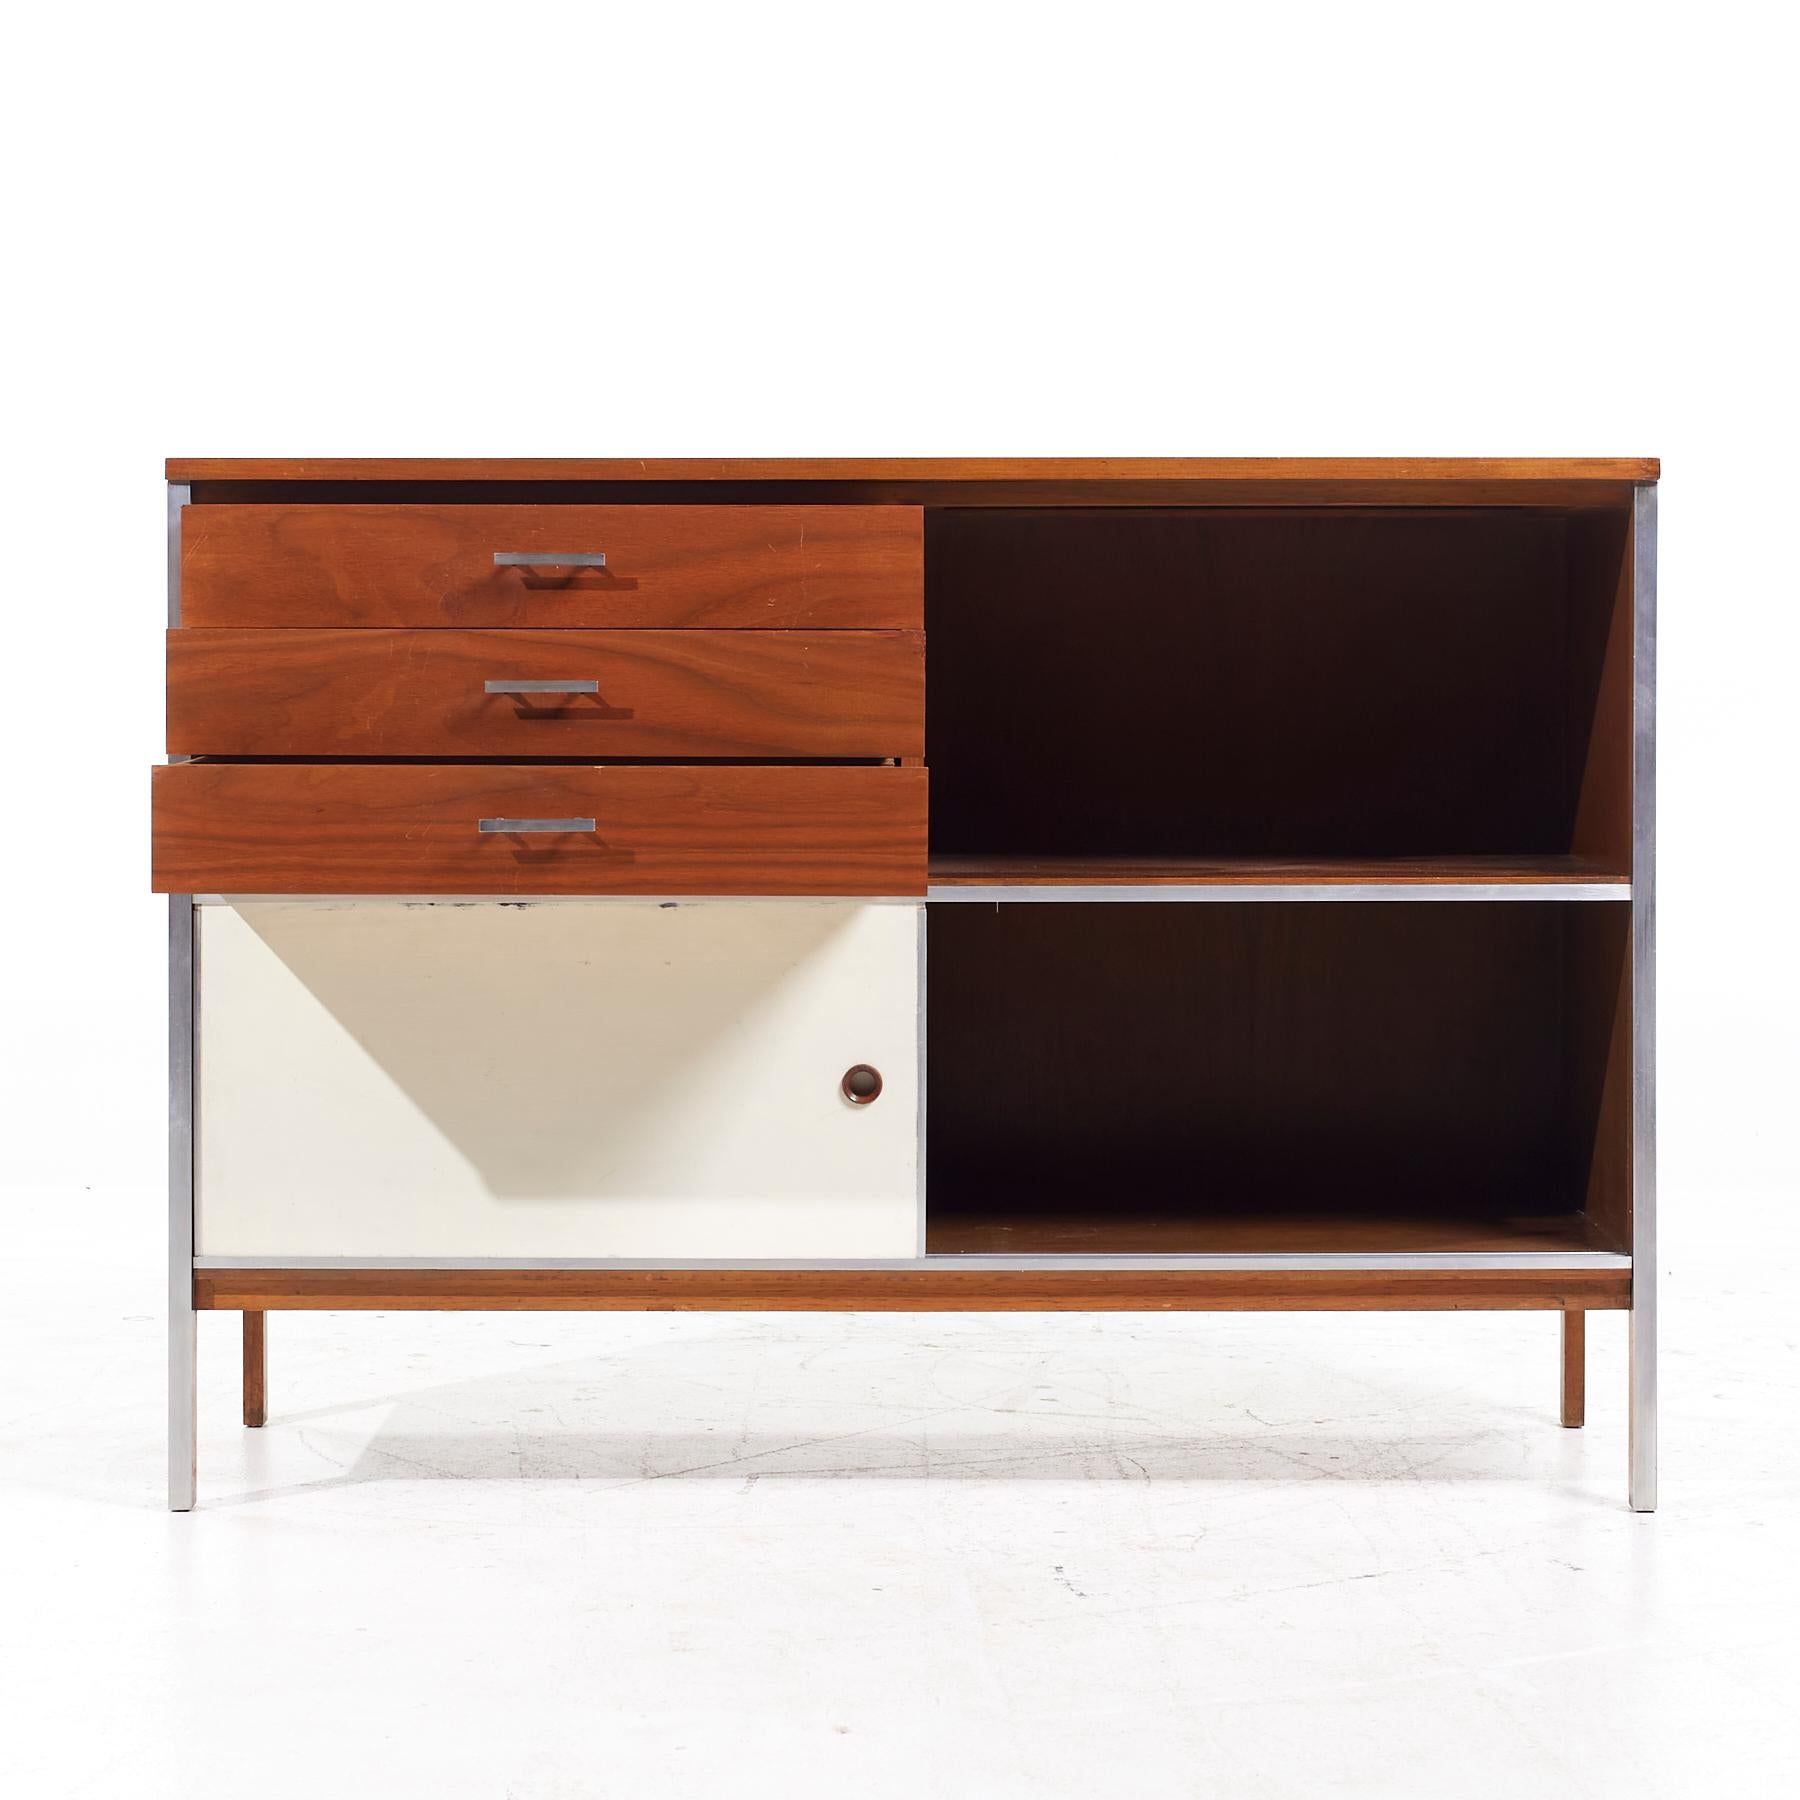 Paul McCobb for Calvin MCM Walnut and Stainless Steel Sliding Door Credenza For Sale 1